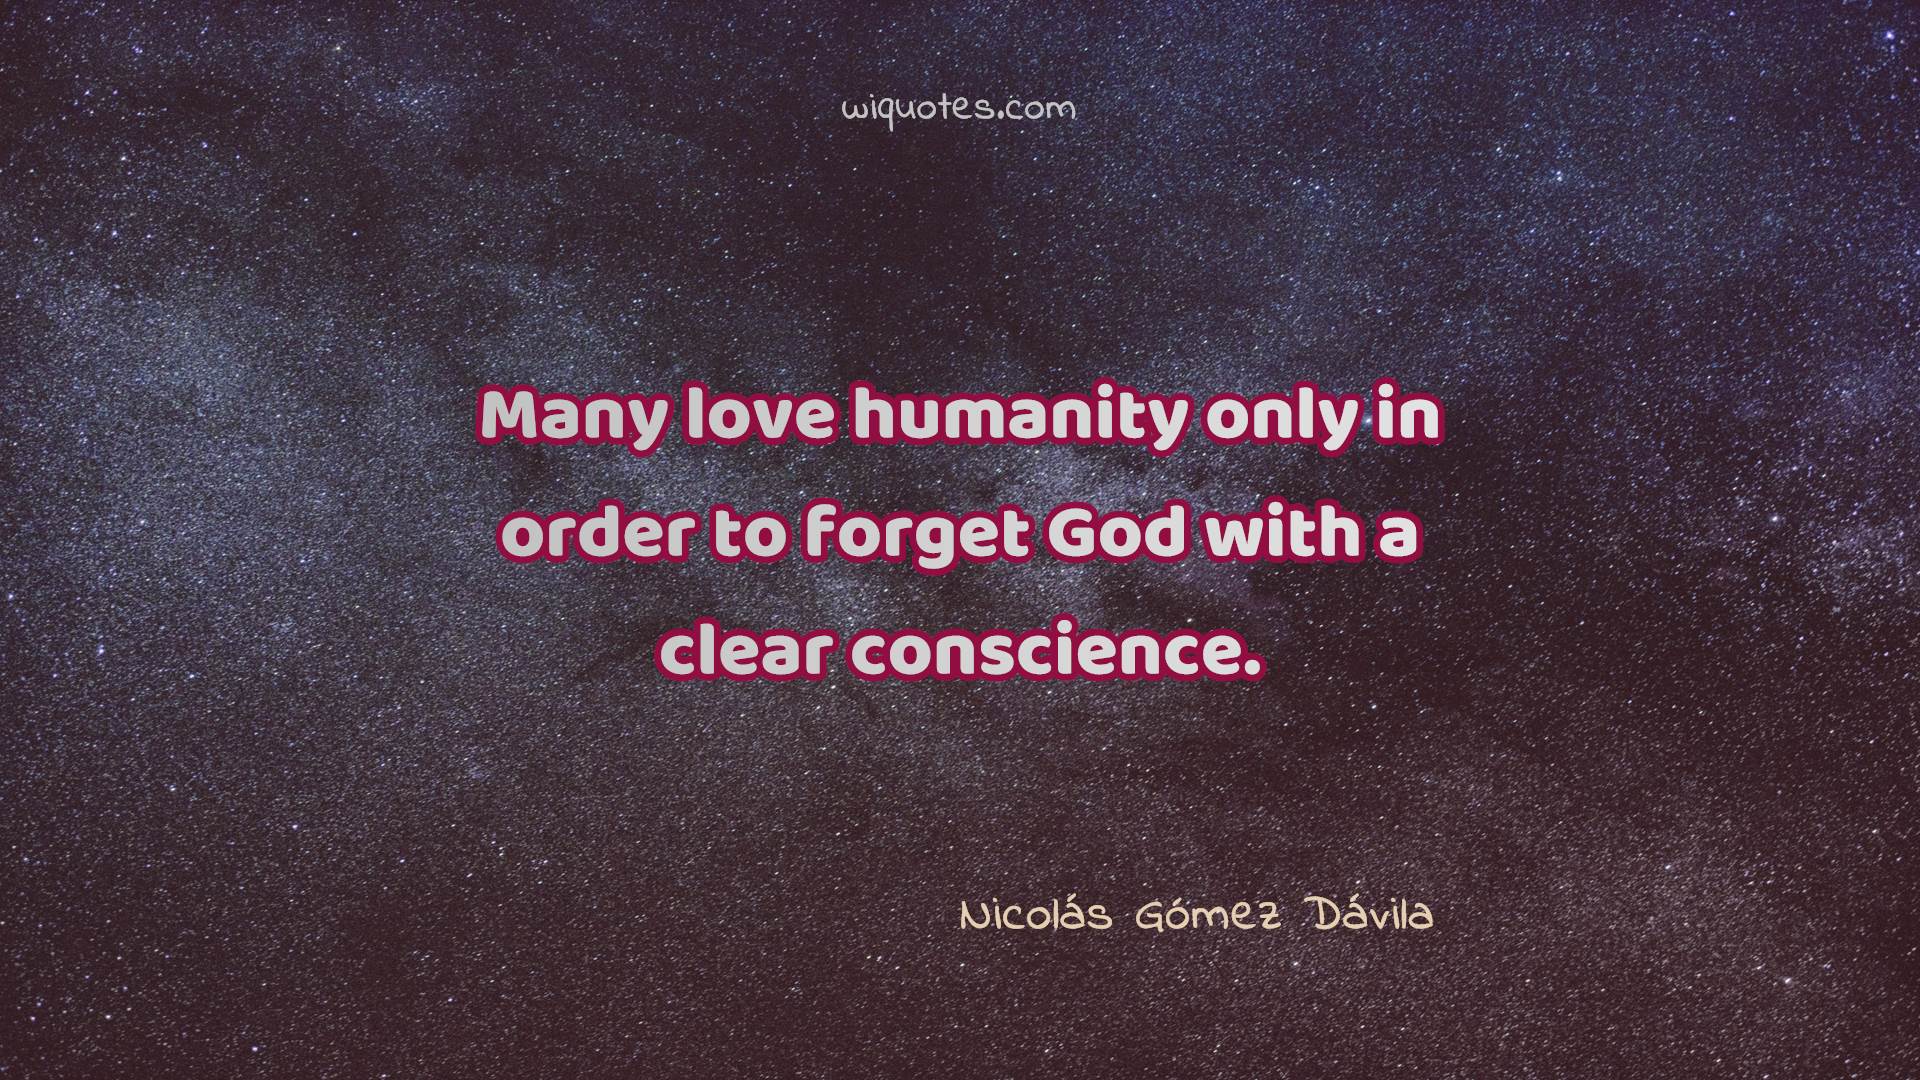 many love humanity only in order to forget god with a clear conscience. nicolas gomee davila